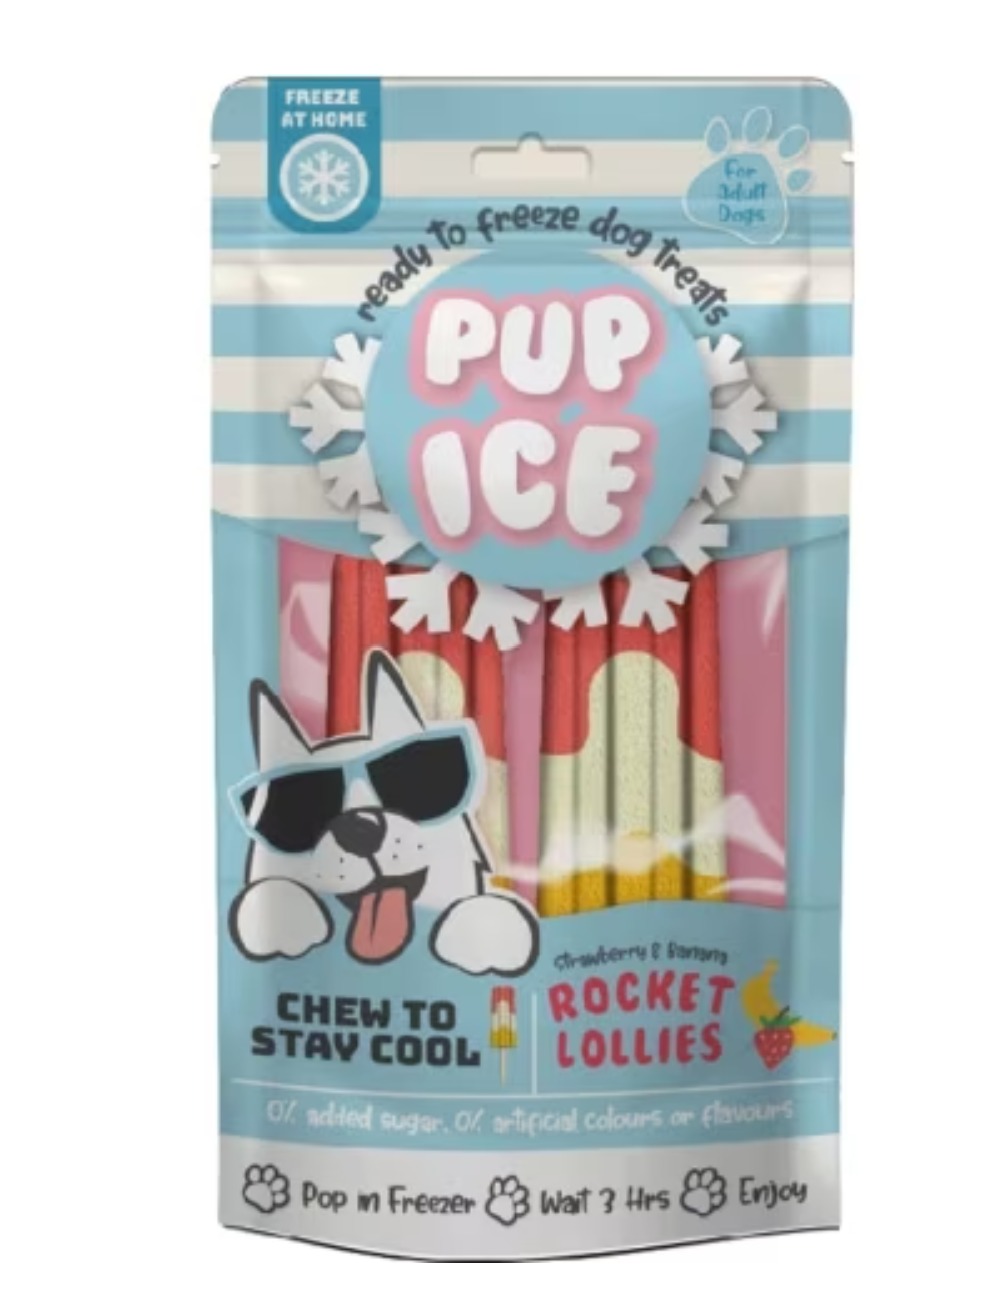 Ethical Pet Pup Ice Rocket Lollies - Strawberry Banana 2pk